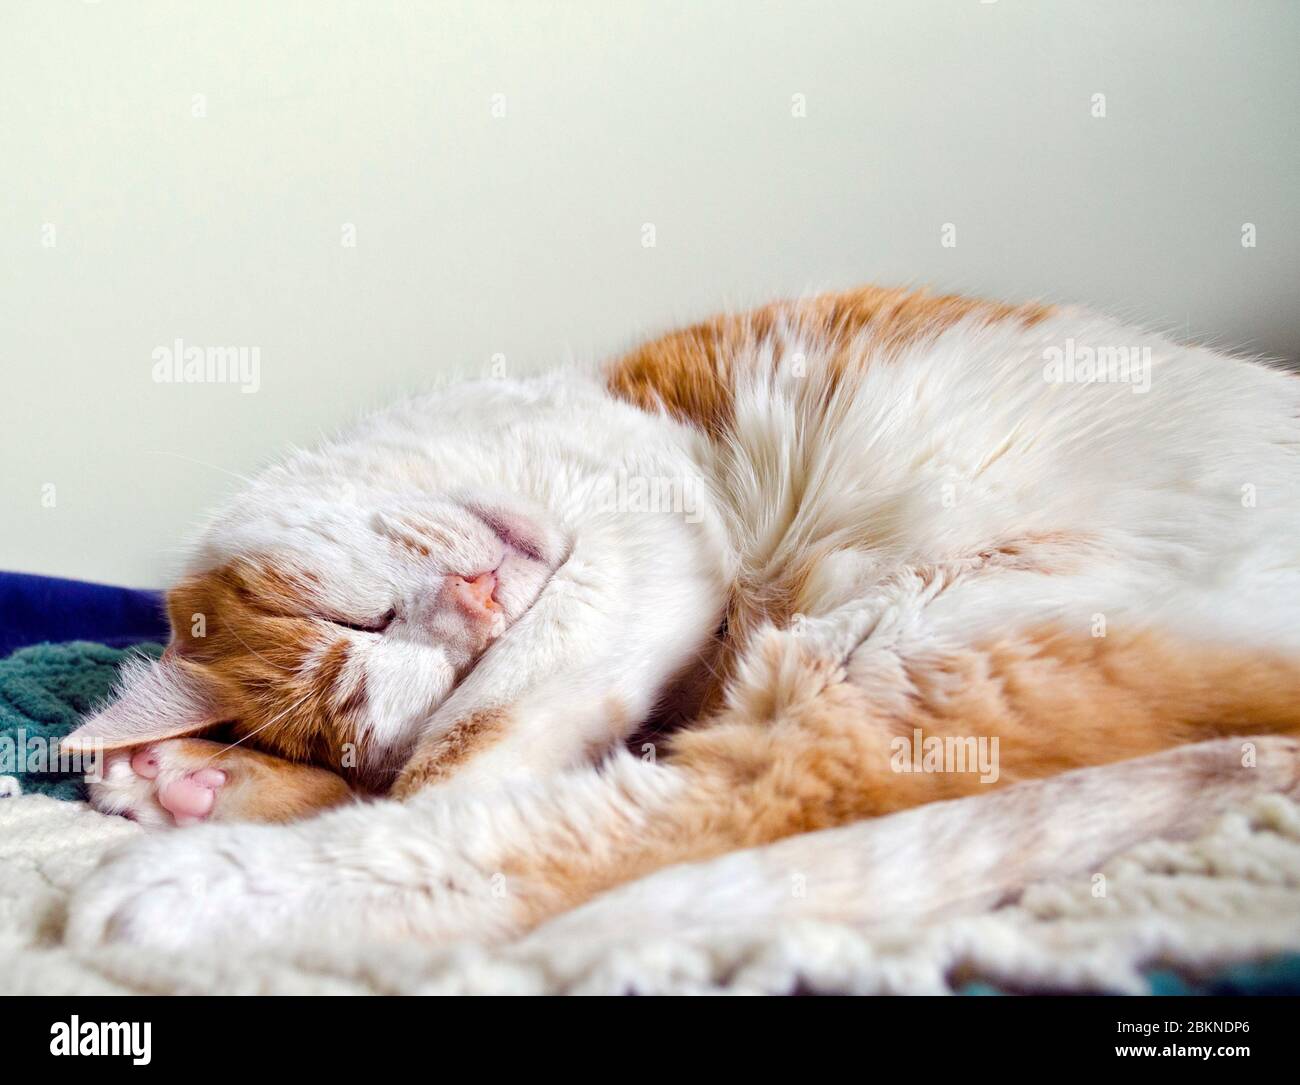 Sweet orange and white cat curled up sleeping on a bed. Orange and ...